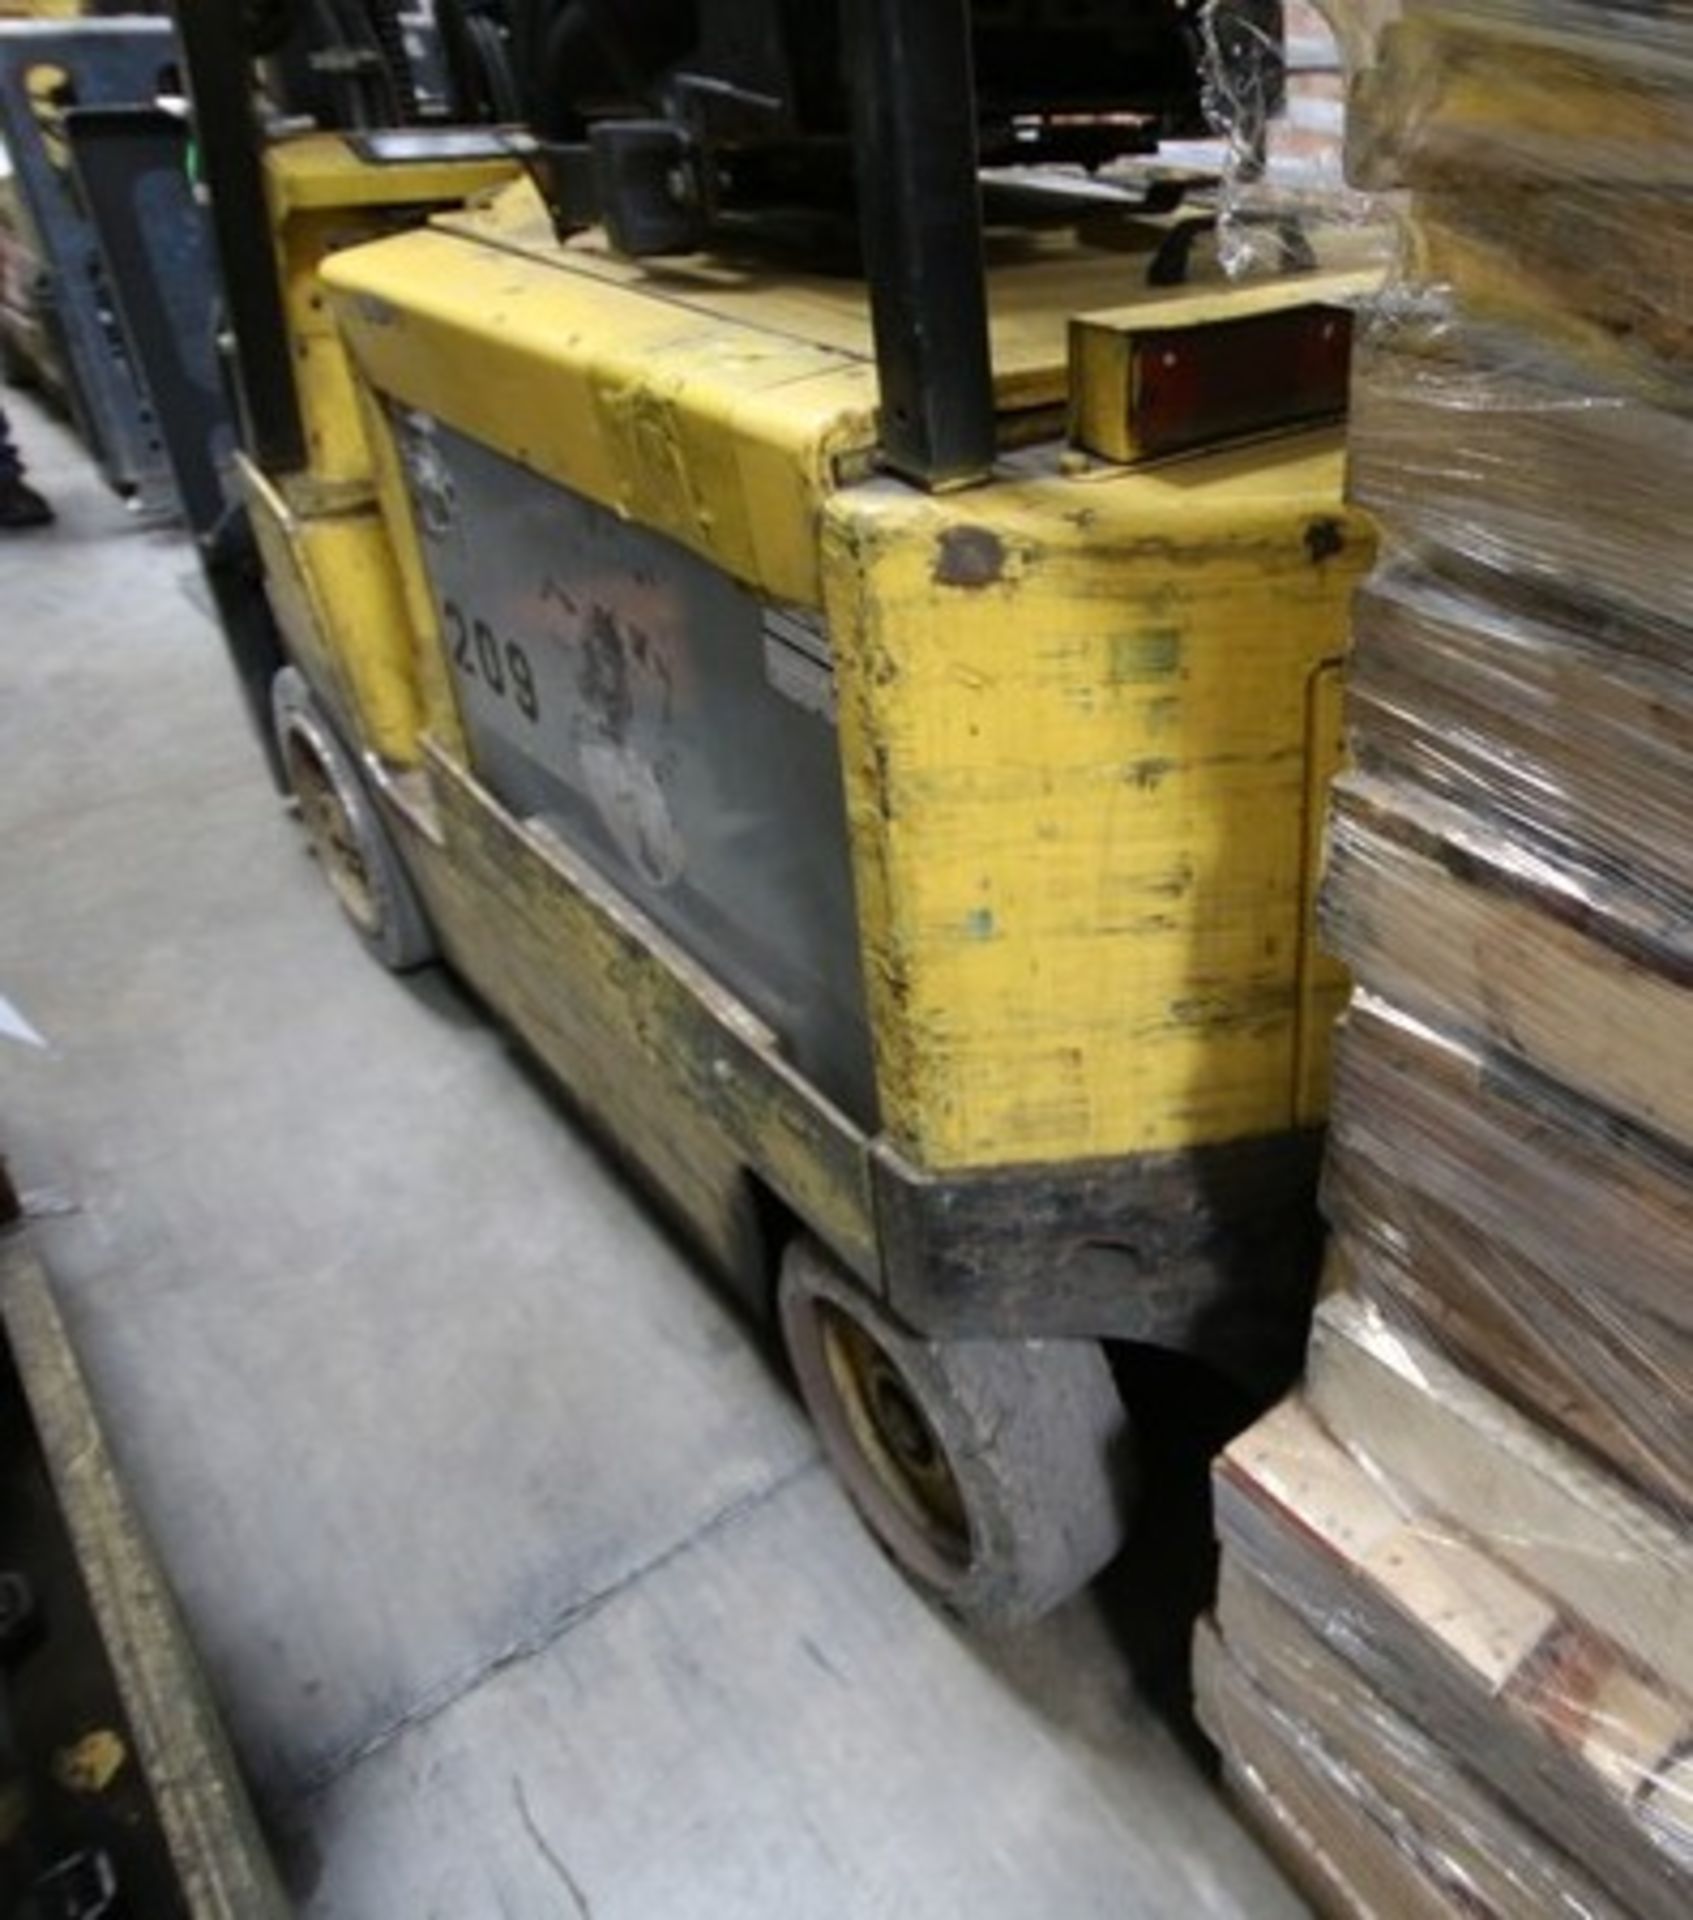 HYSTER, 3 Stage Mast Forklift, Model E50XM, S/N C108V21200R , 3,700lbs Capacity, Equipped with LORAN - Image 5 of 6